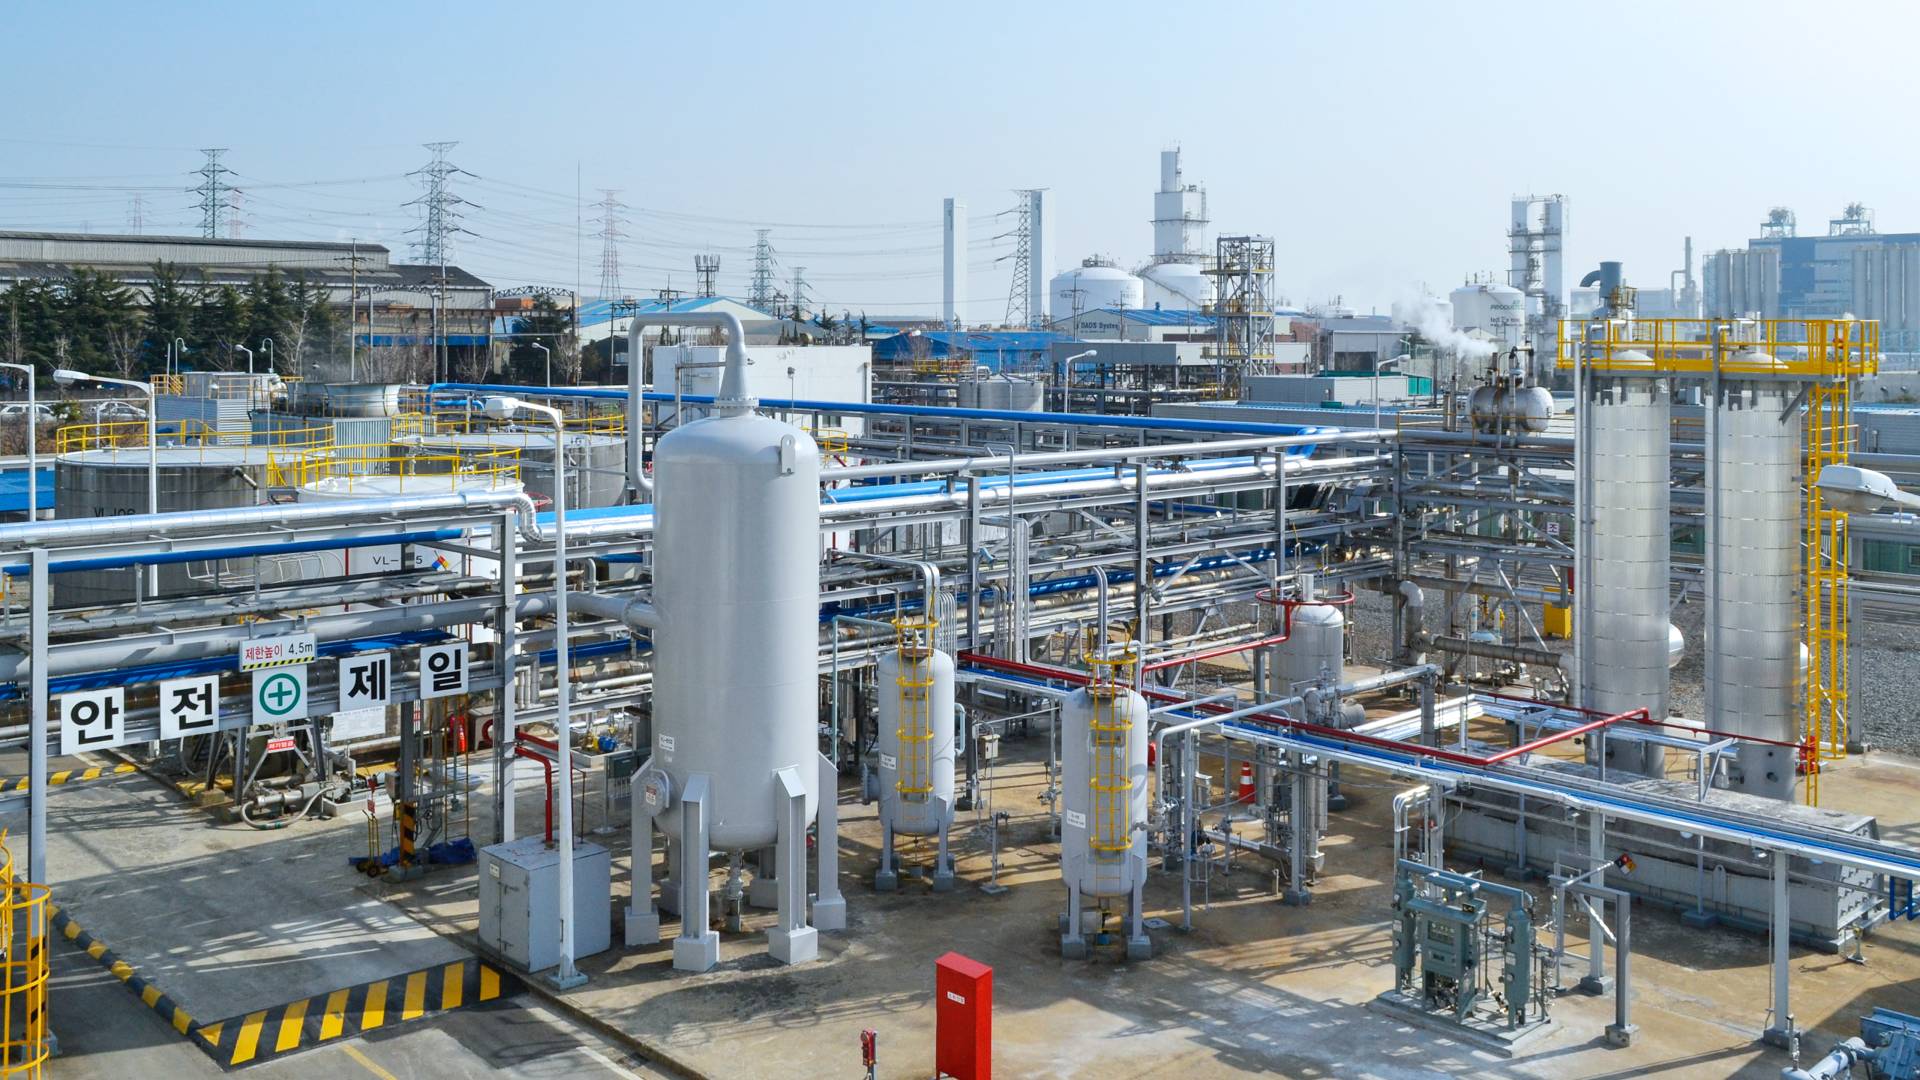 Production site in Ulsan